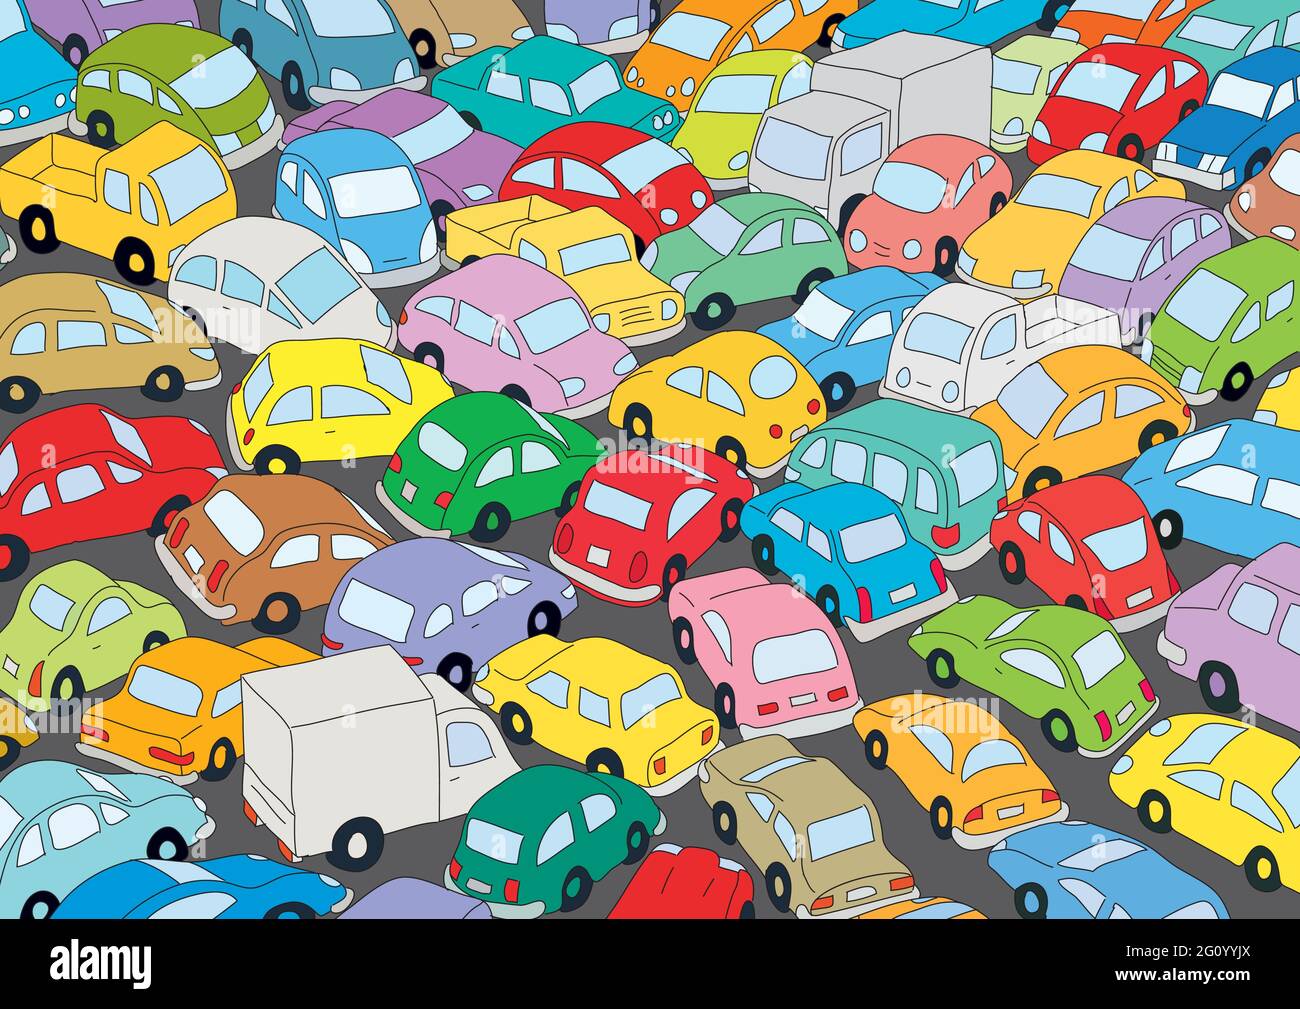 Car traffic jam, vector illustration with many cars Stock Vector